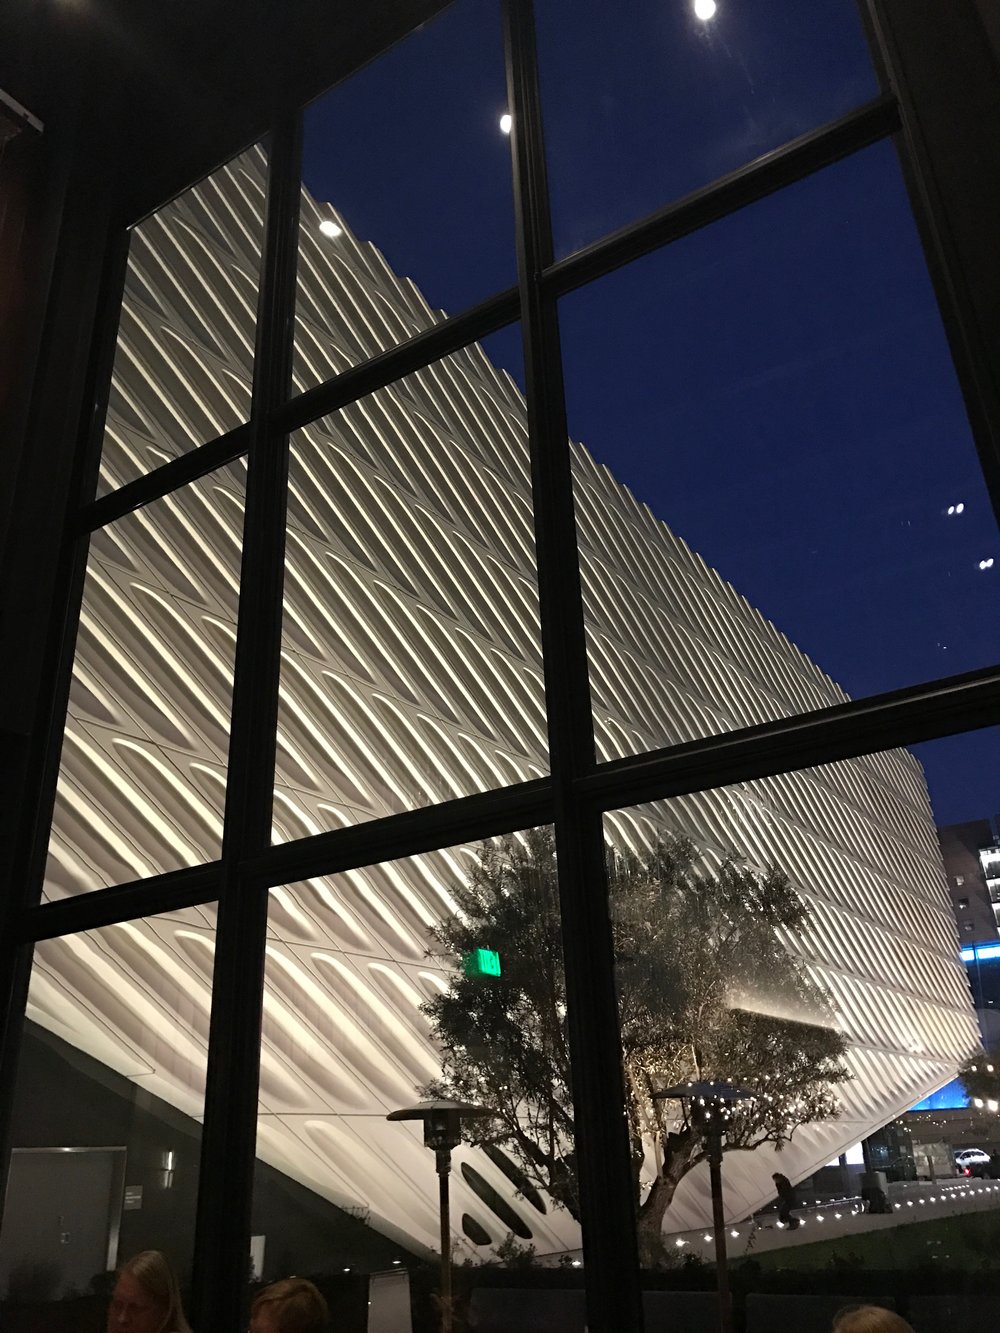  The view on  The Broad  museum from  Otium.&nbsp;  